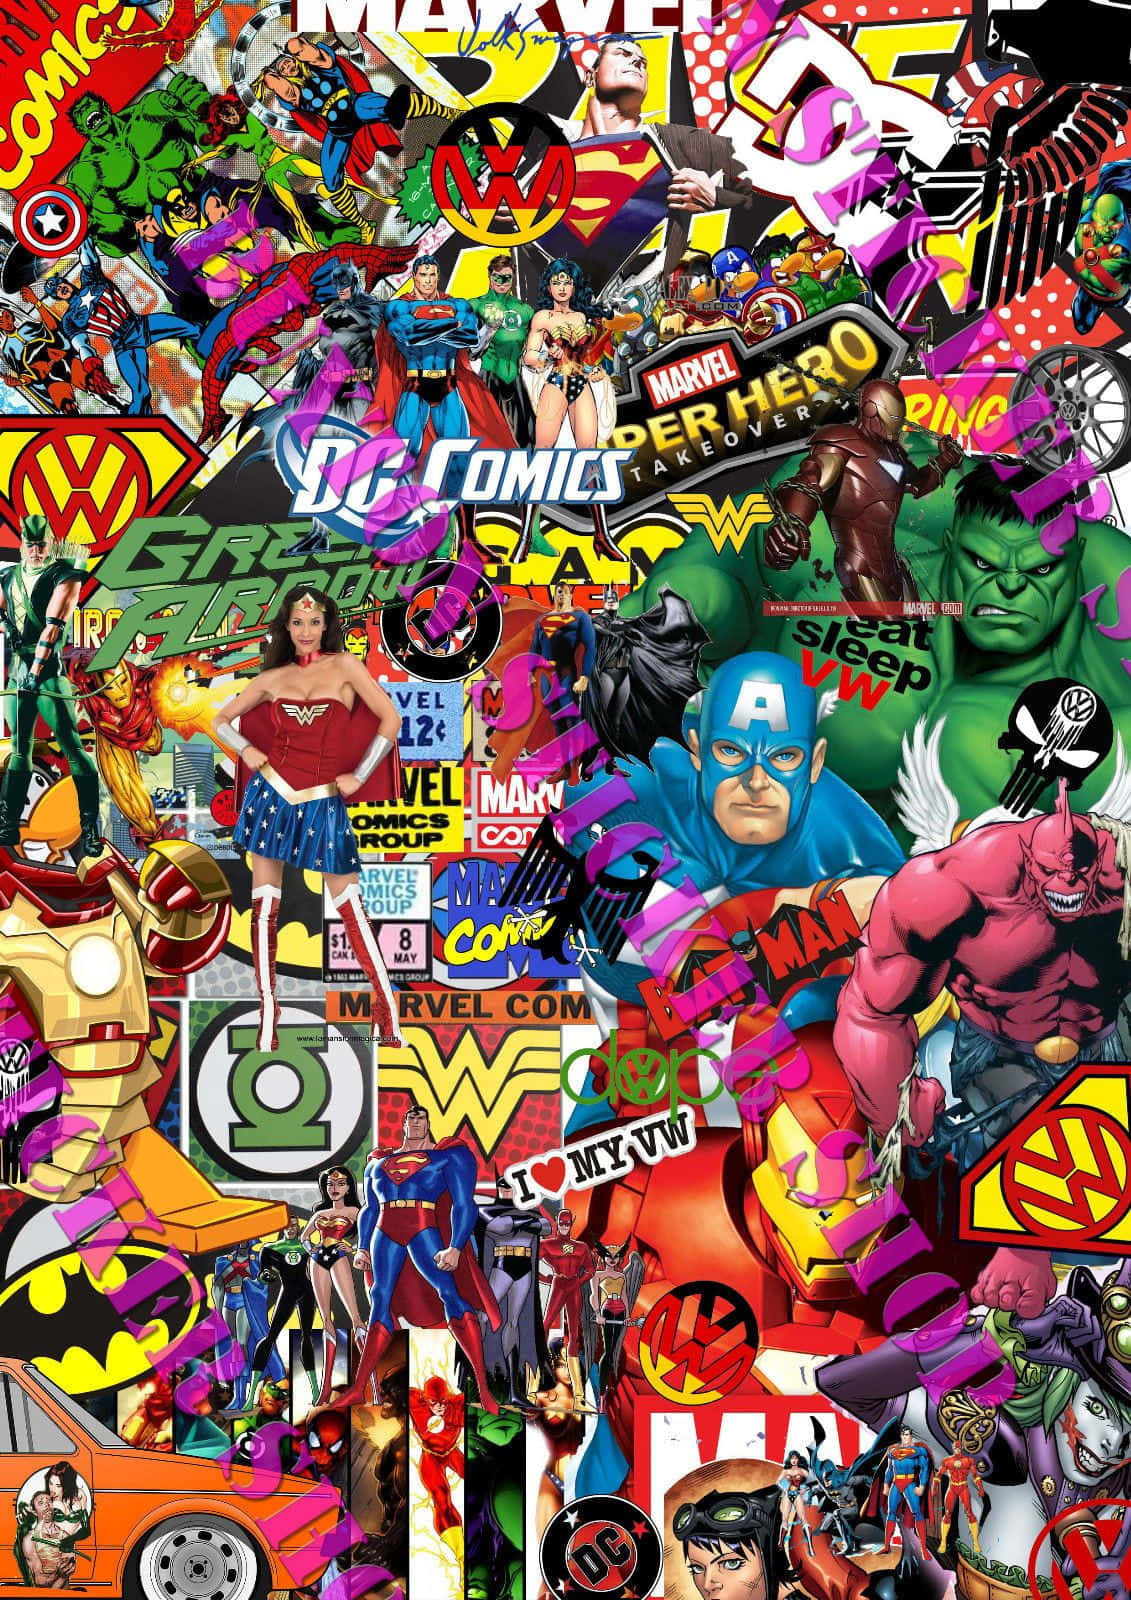 Get the latest updates on Marvel and DC's superhero stories in one place with the Marvel and DC Iphone! Wallpaper